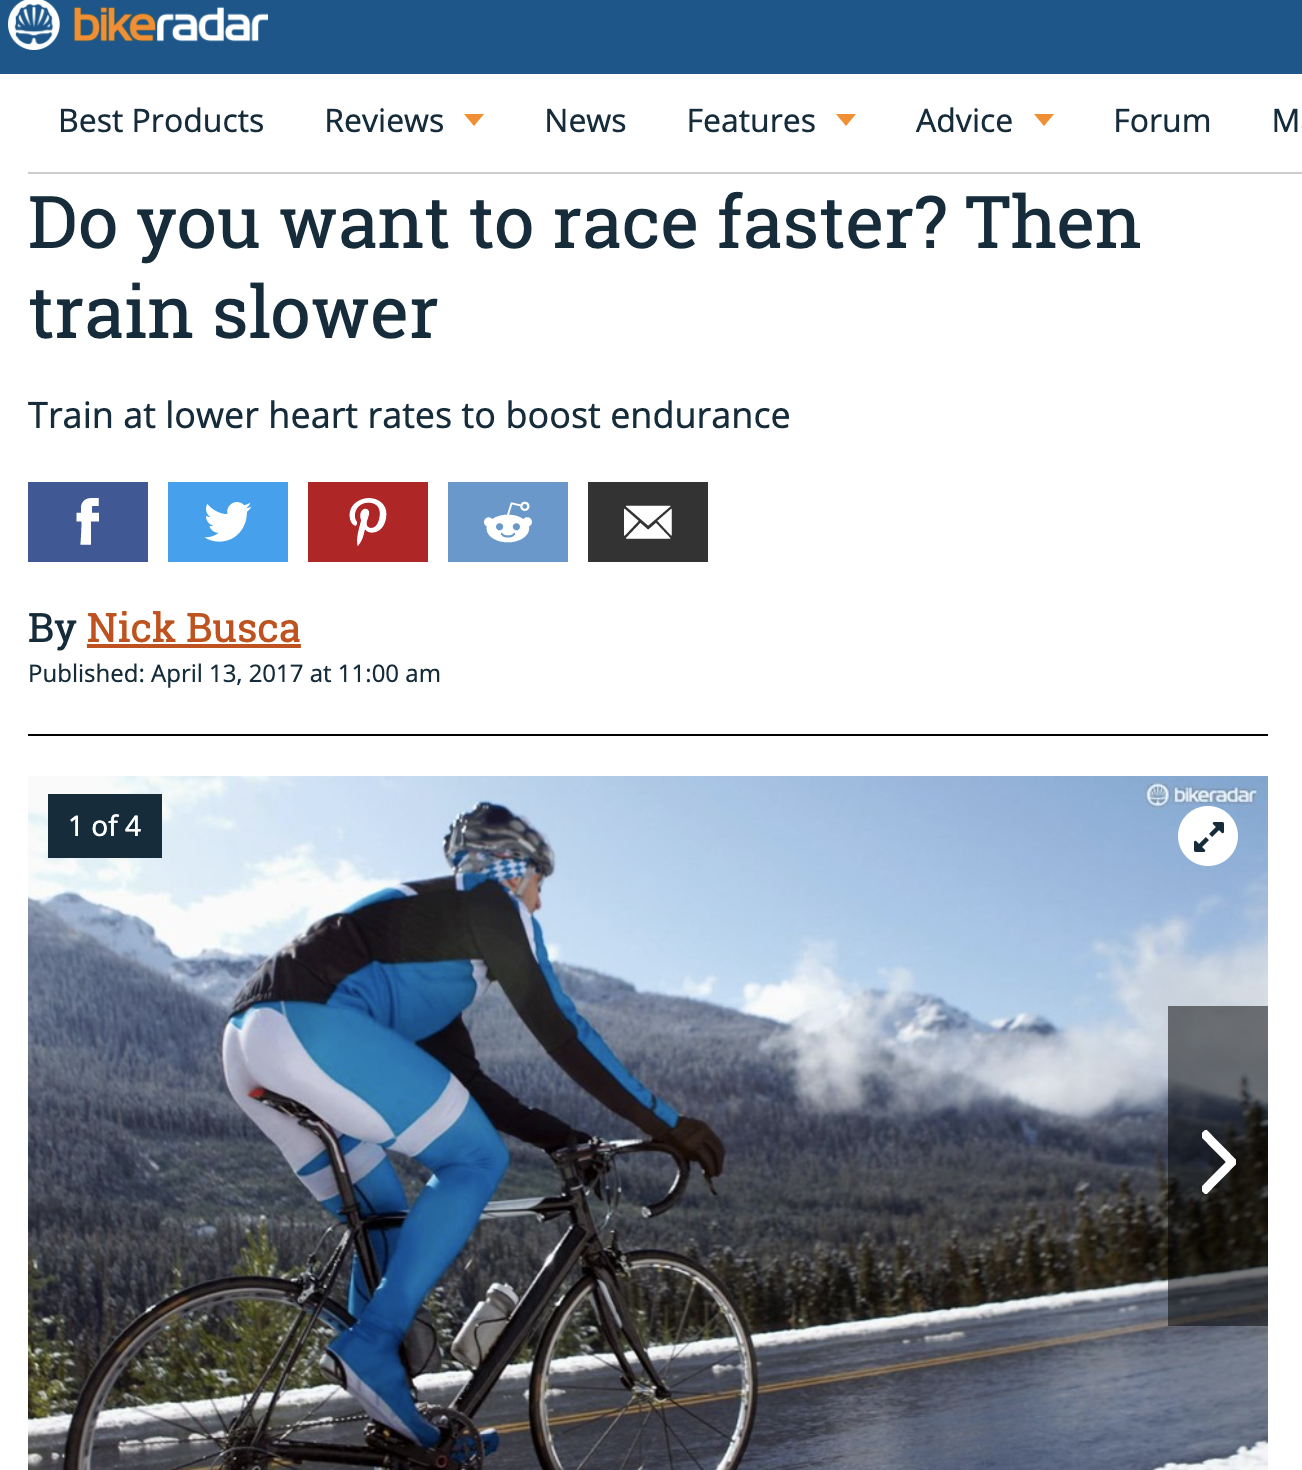 Do you want to race faster? Then train slower